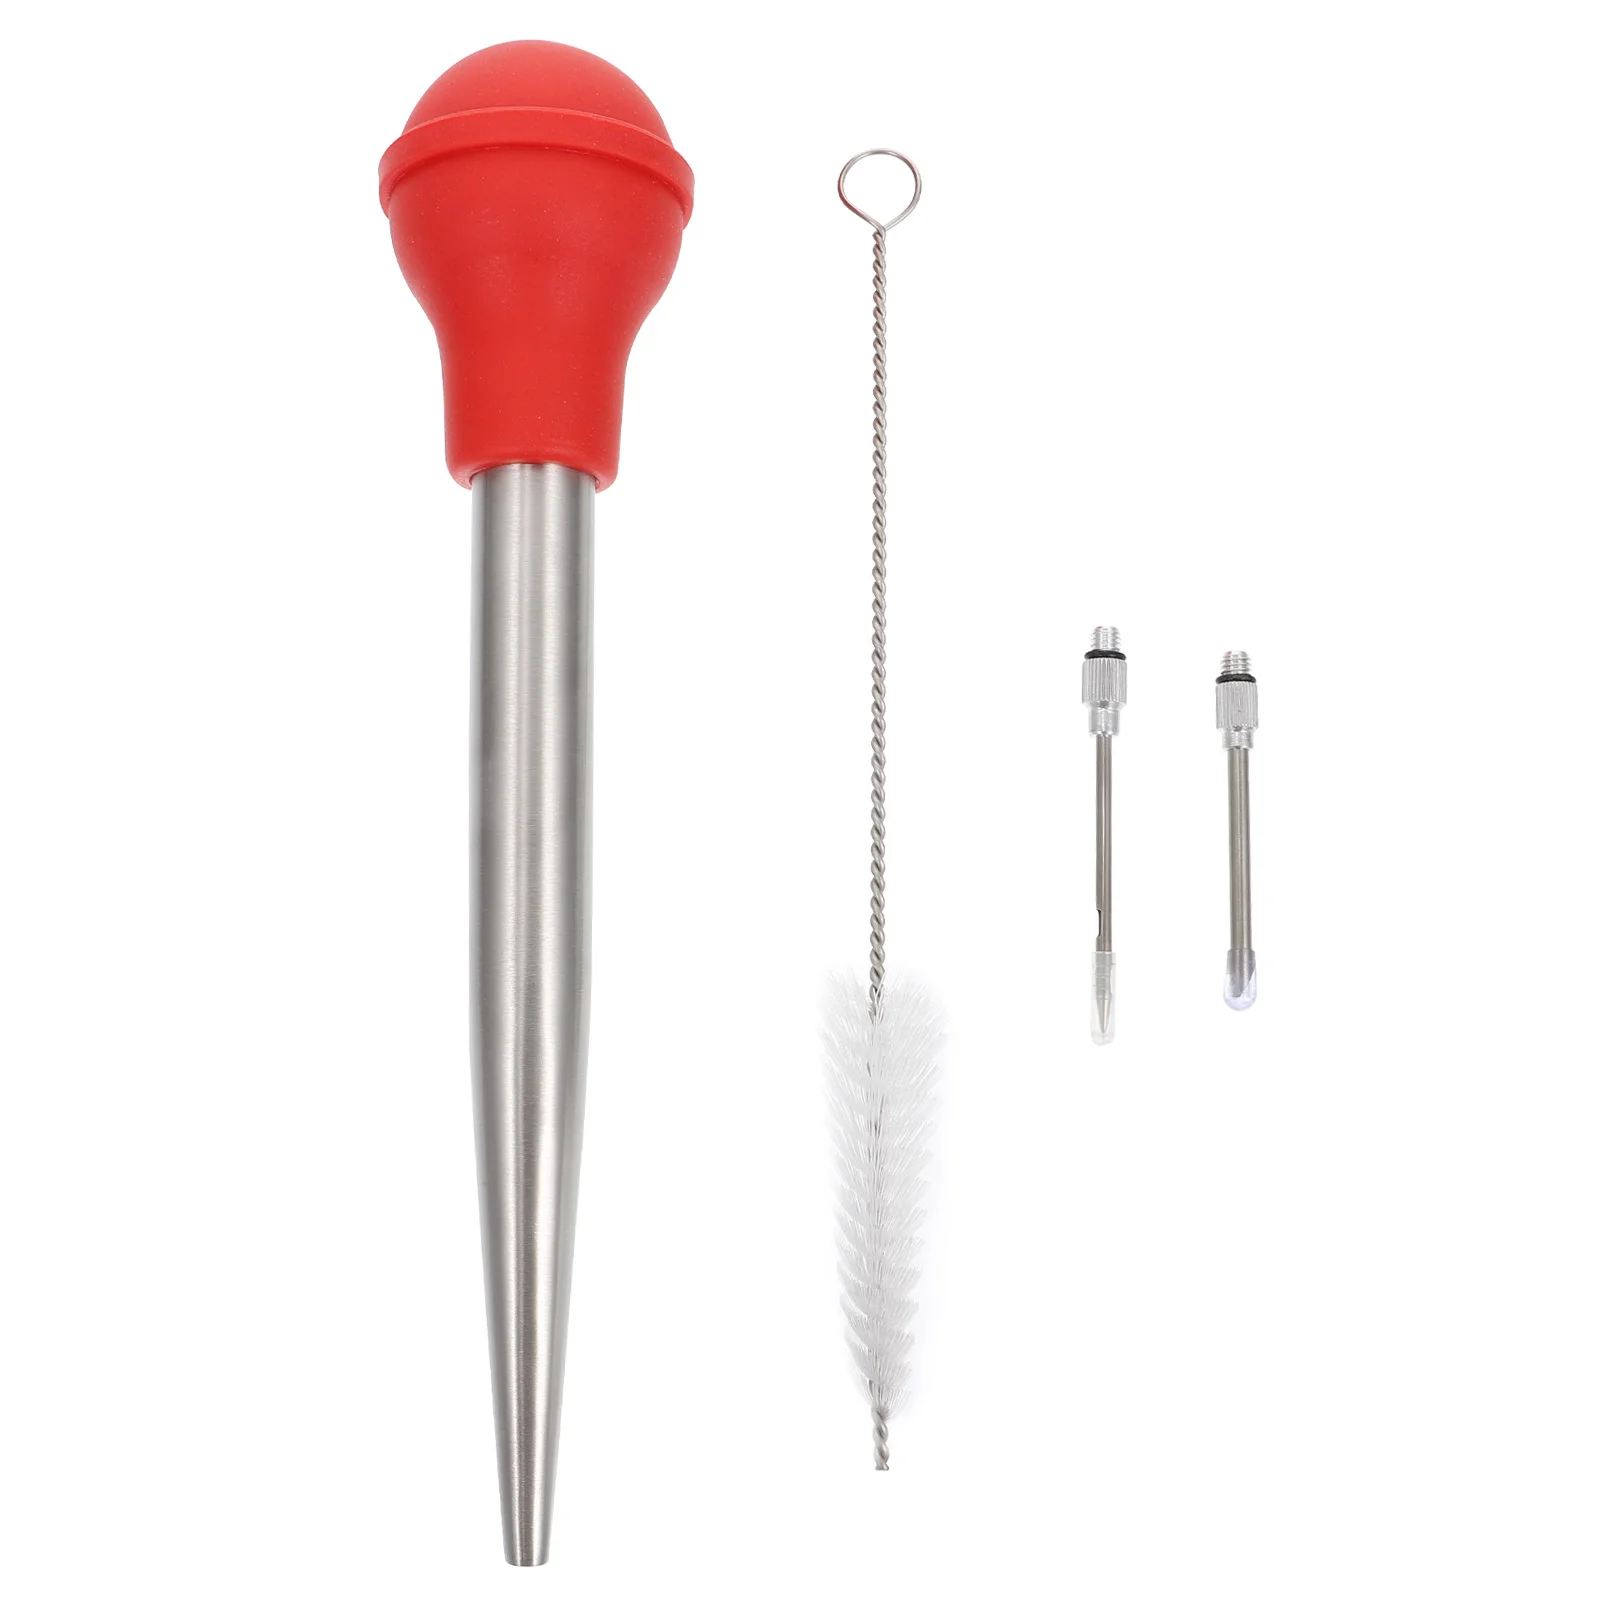 

Injector Turkey Syringe Meat Sauce Bbq Injection Baster Seasoning Barbecue Steel Stainless Tools Brush Roast Marinade Basting